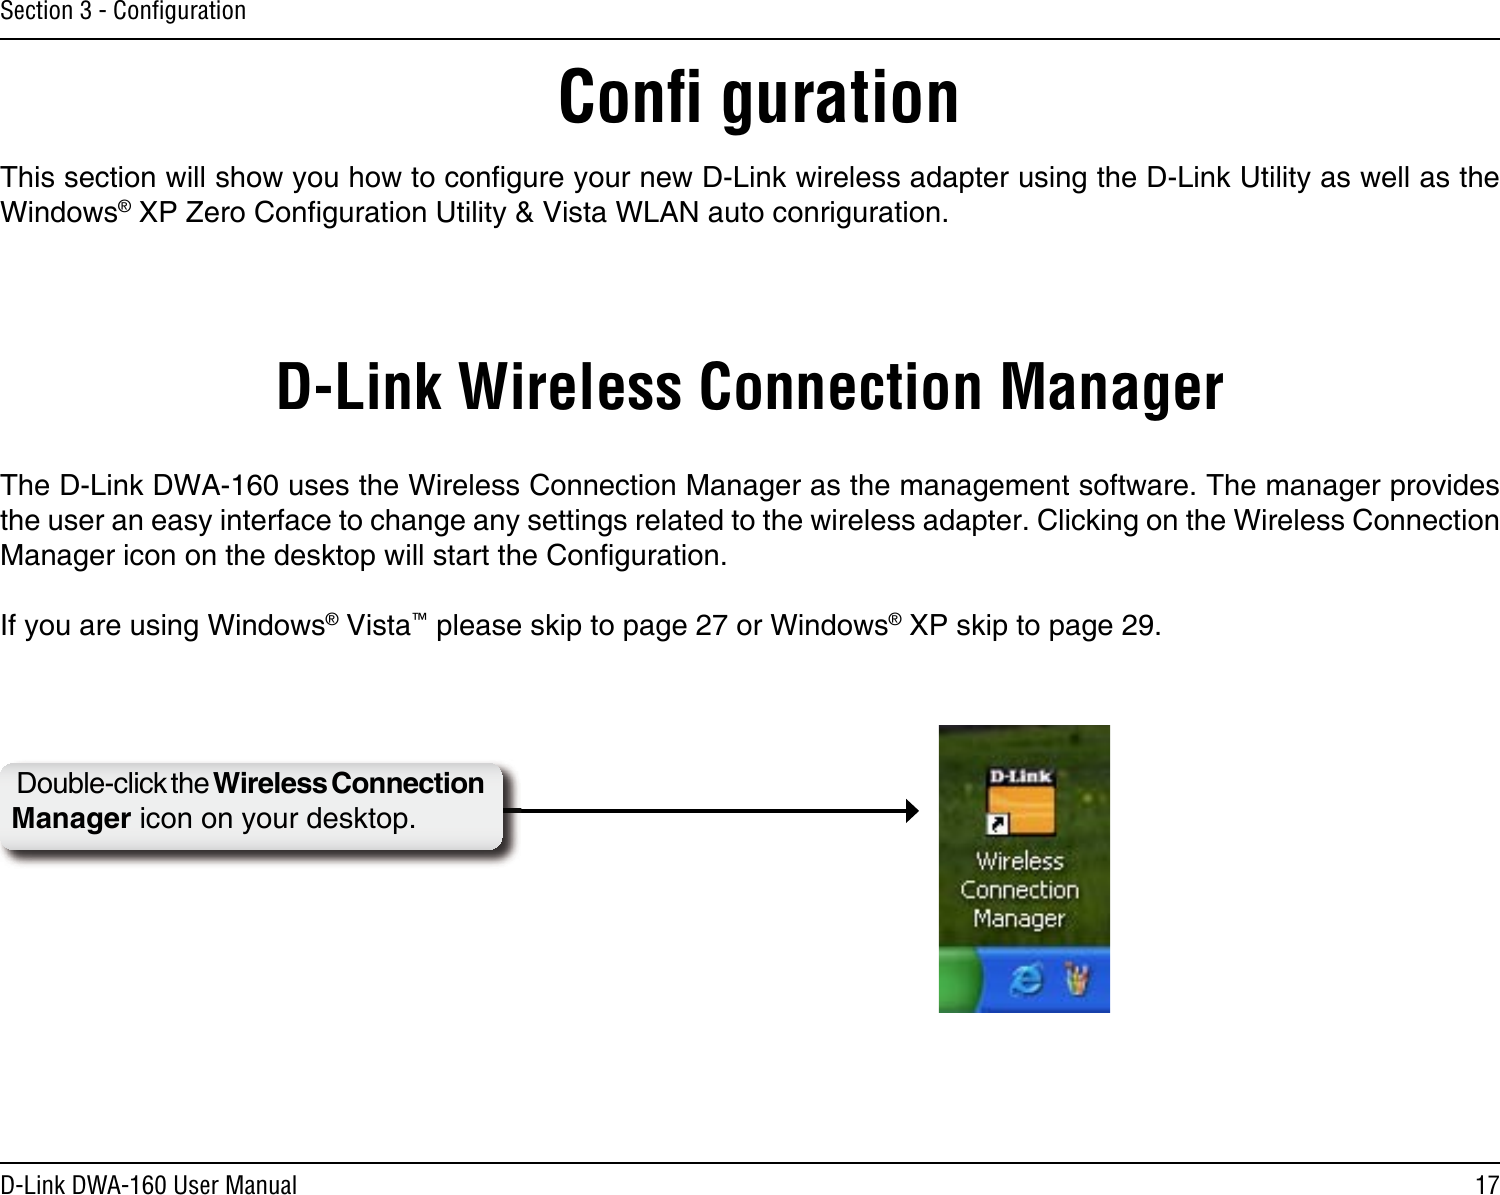 17D-Link DWA-160 User ManualSection 3 - ConﬁgurationConﬁ gurationThis section will show you how to conﬁgure your new D-Link wireless adapter using the D-Link Utility as well as the Windows® XP Zero Conﬁguration Utility &amp; Vista WLAN auto conriguration.D-Link Wireless Connection ManagerThe D-Link DWA-160 uses the Wireless Connection Manager as the management software. The manager provides the user an easy interface to change any settings related to the wireless adapter. Clicking on the Wireless Connection Manager icon on the desktop will start the Conﬁguration.If you are using Windows® Vista™ please skip to page 27 or Windows® XP skip to page 29.Double-click the Wireless Connection Manager icon on your desktop.